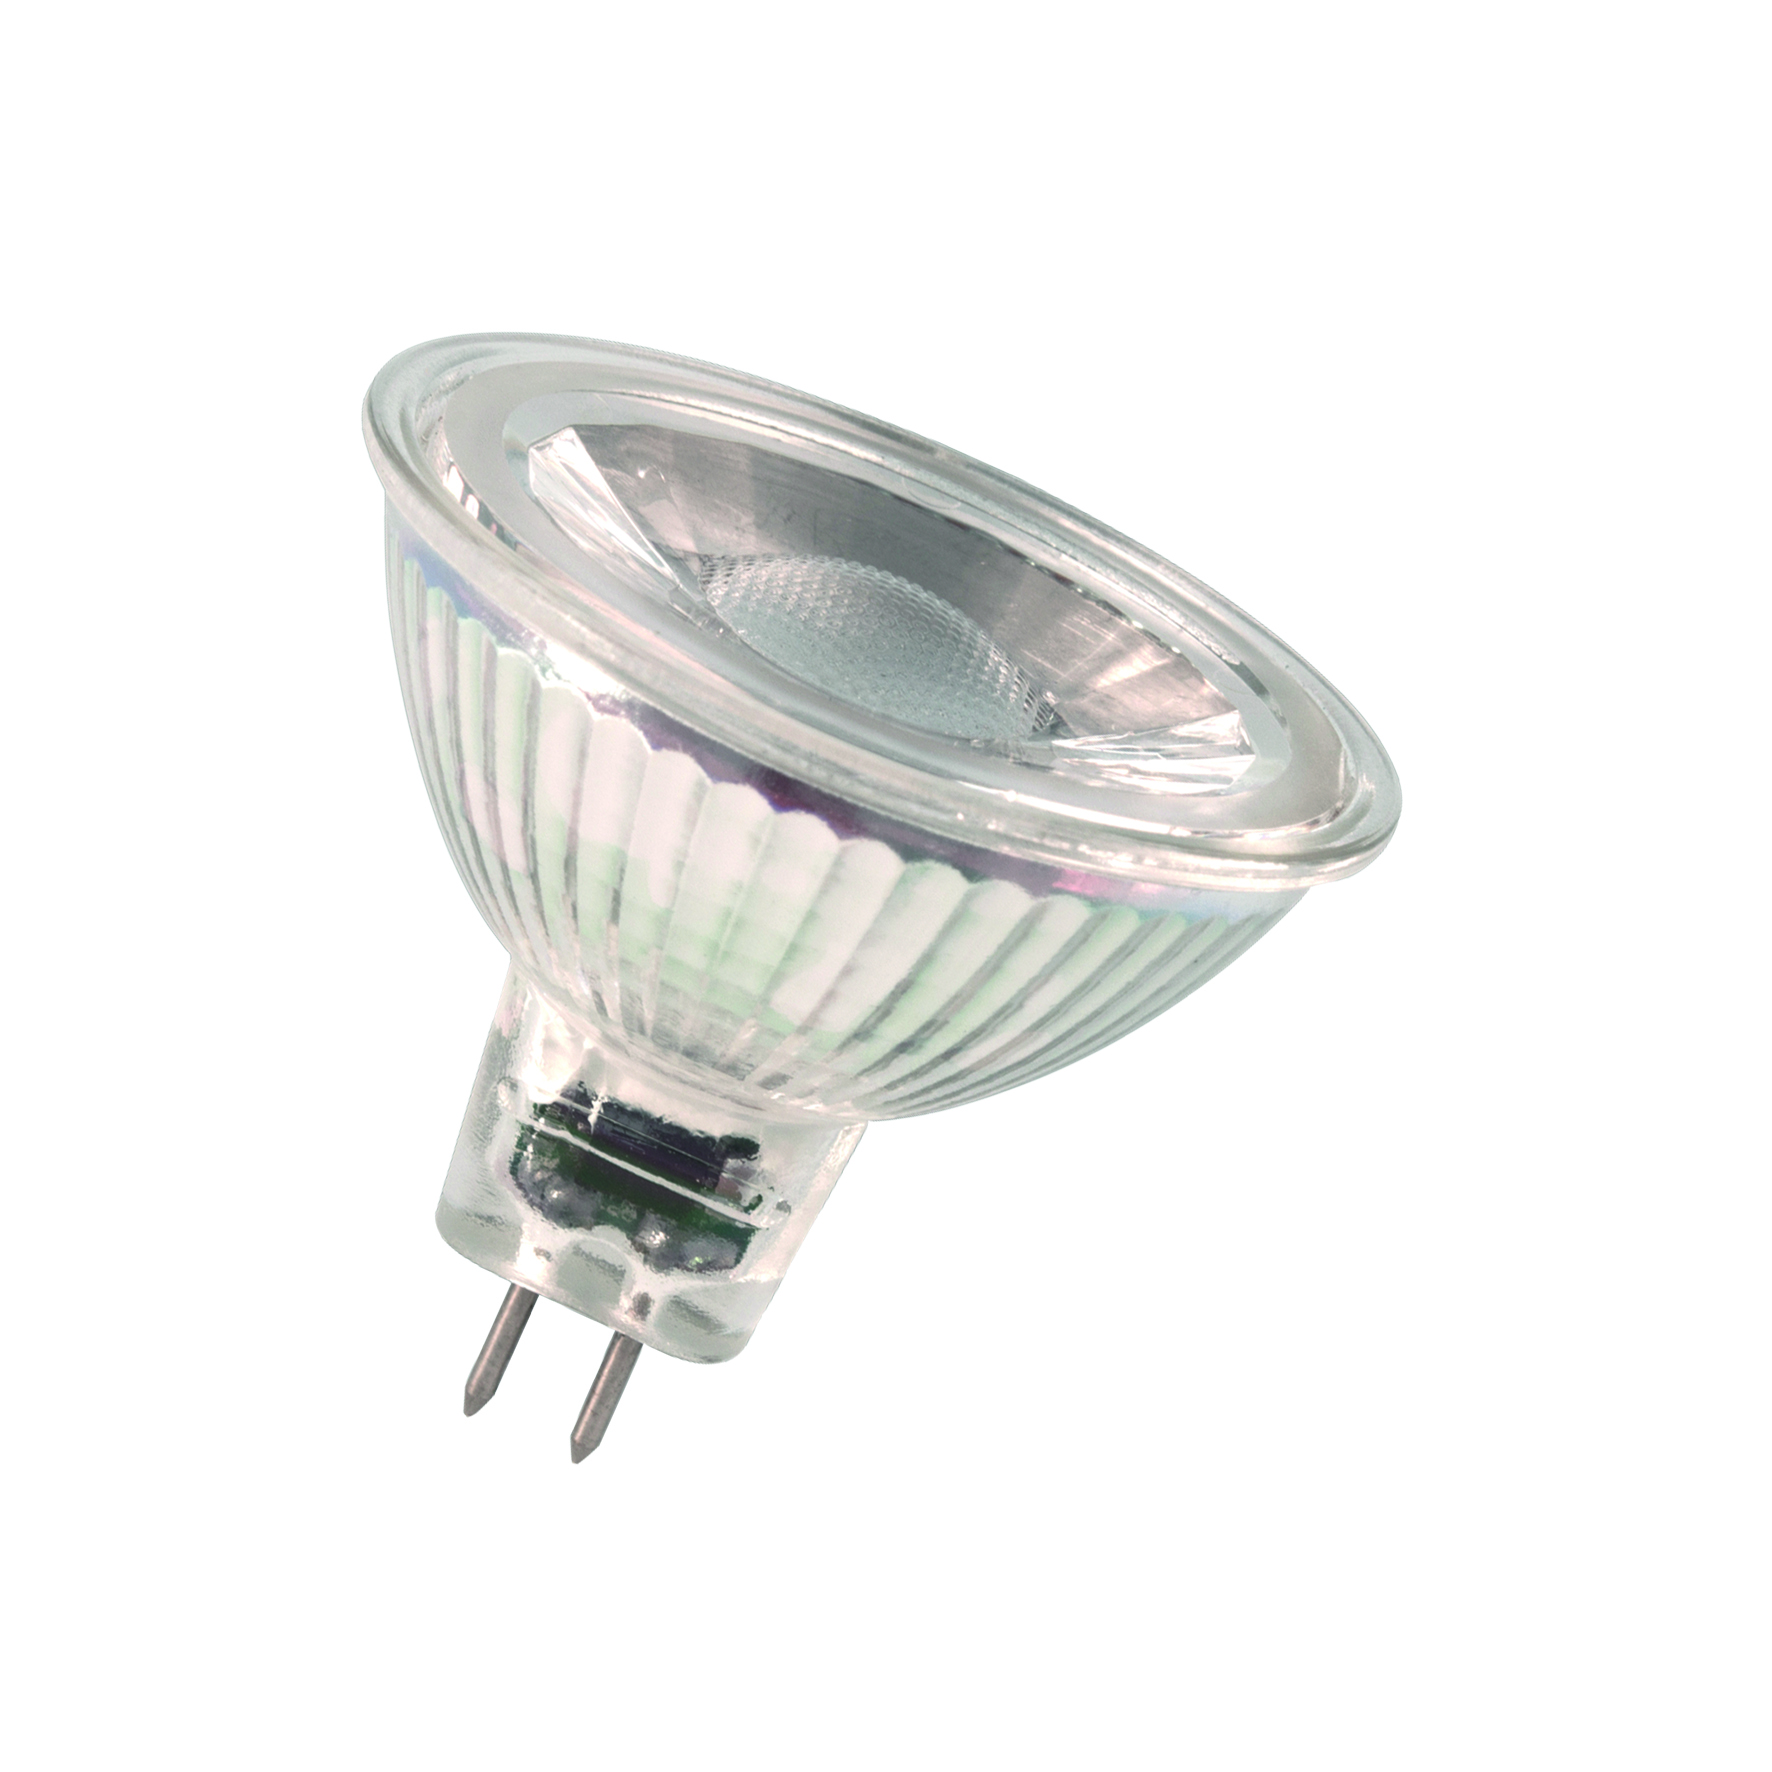 Thriller Controle afwijzing 08712879133360 - LED-lamp - Lampen - e-Bailey | Bailey